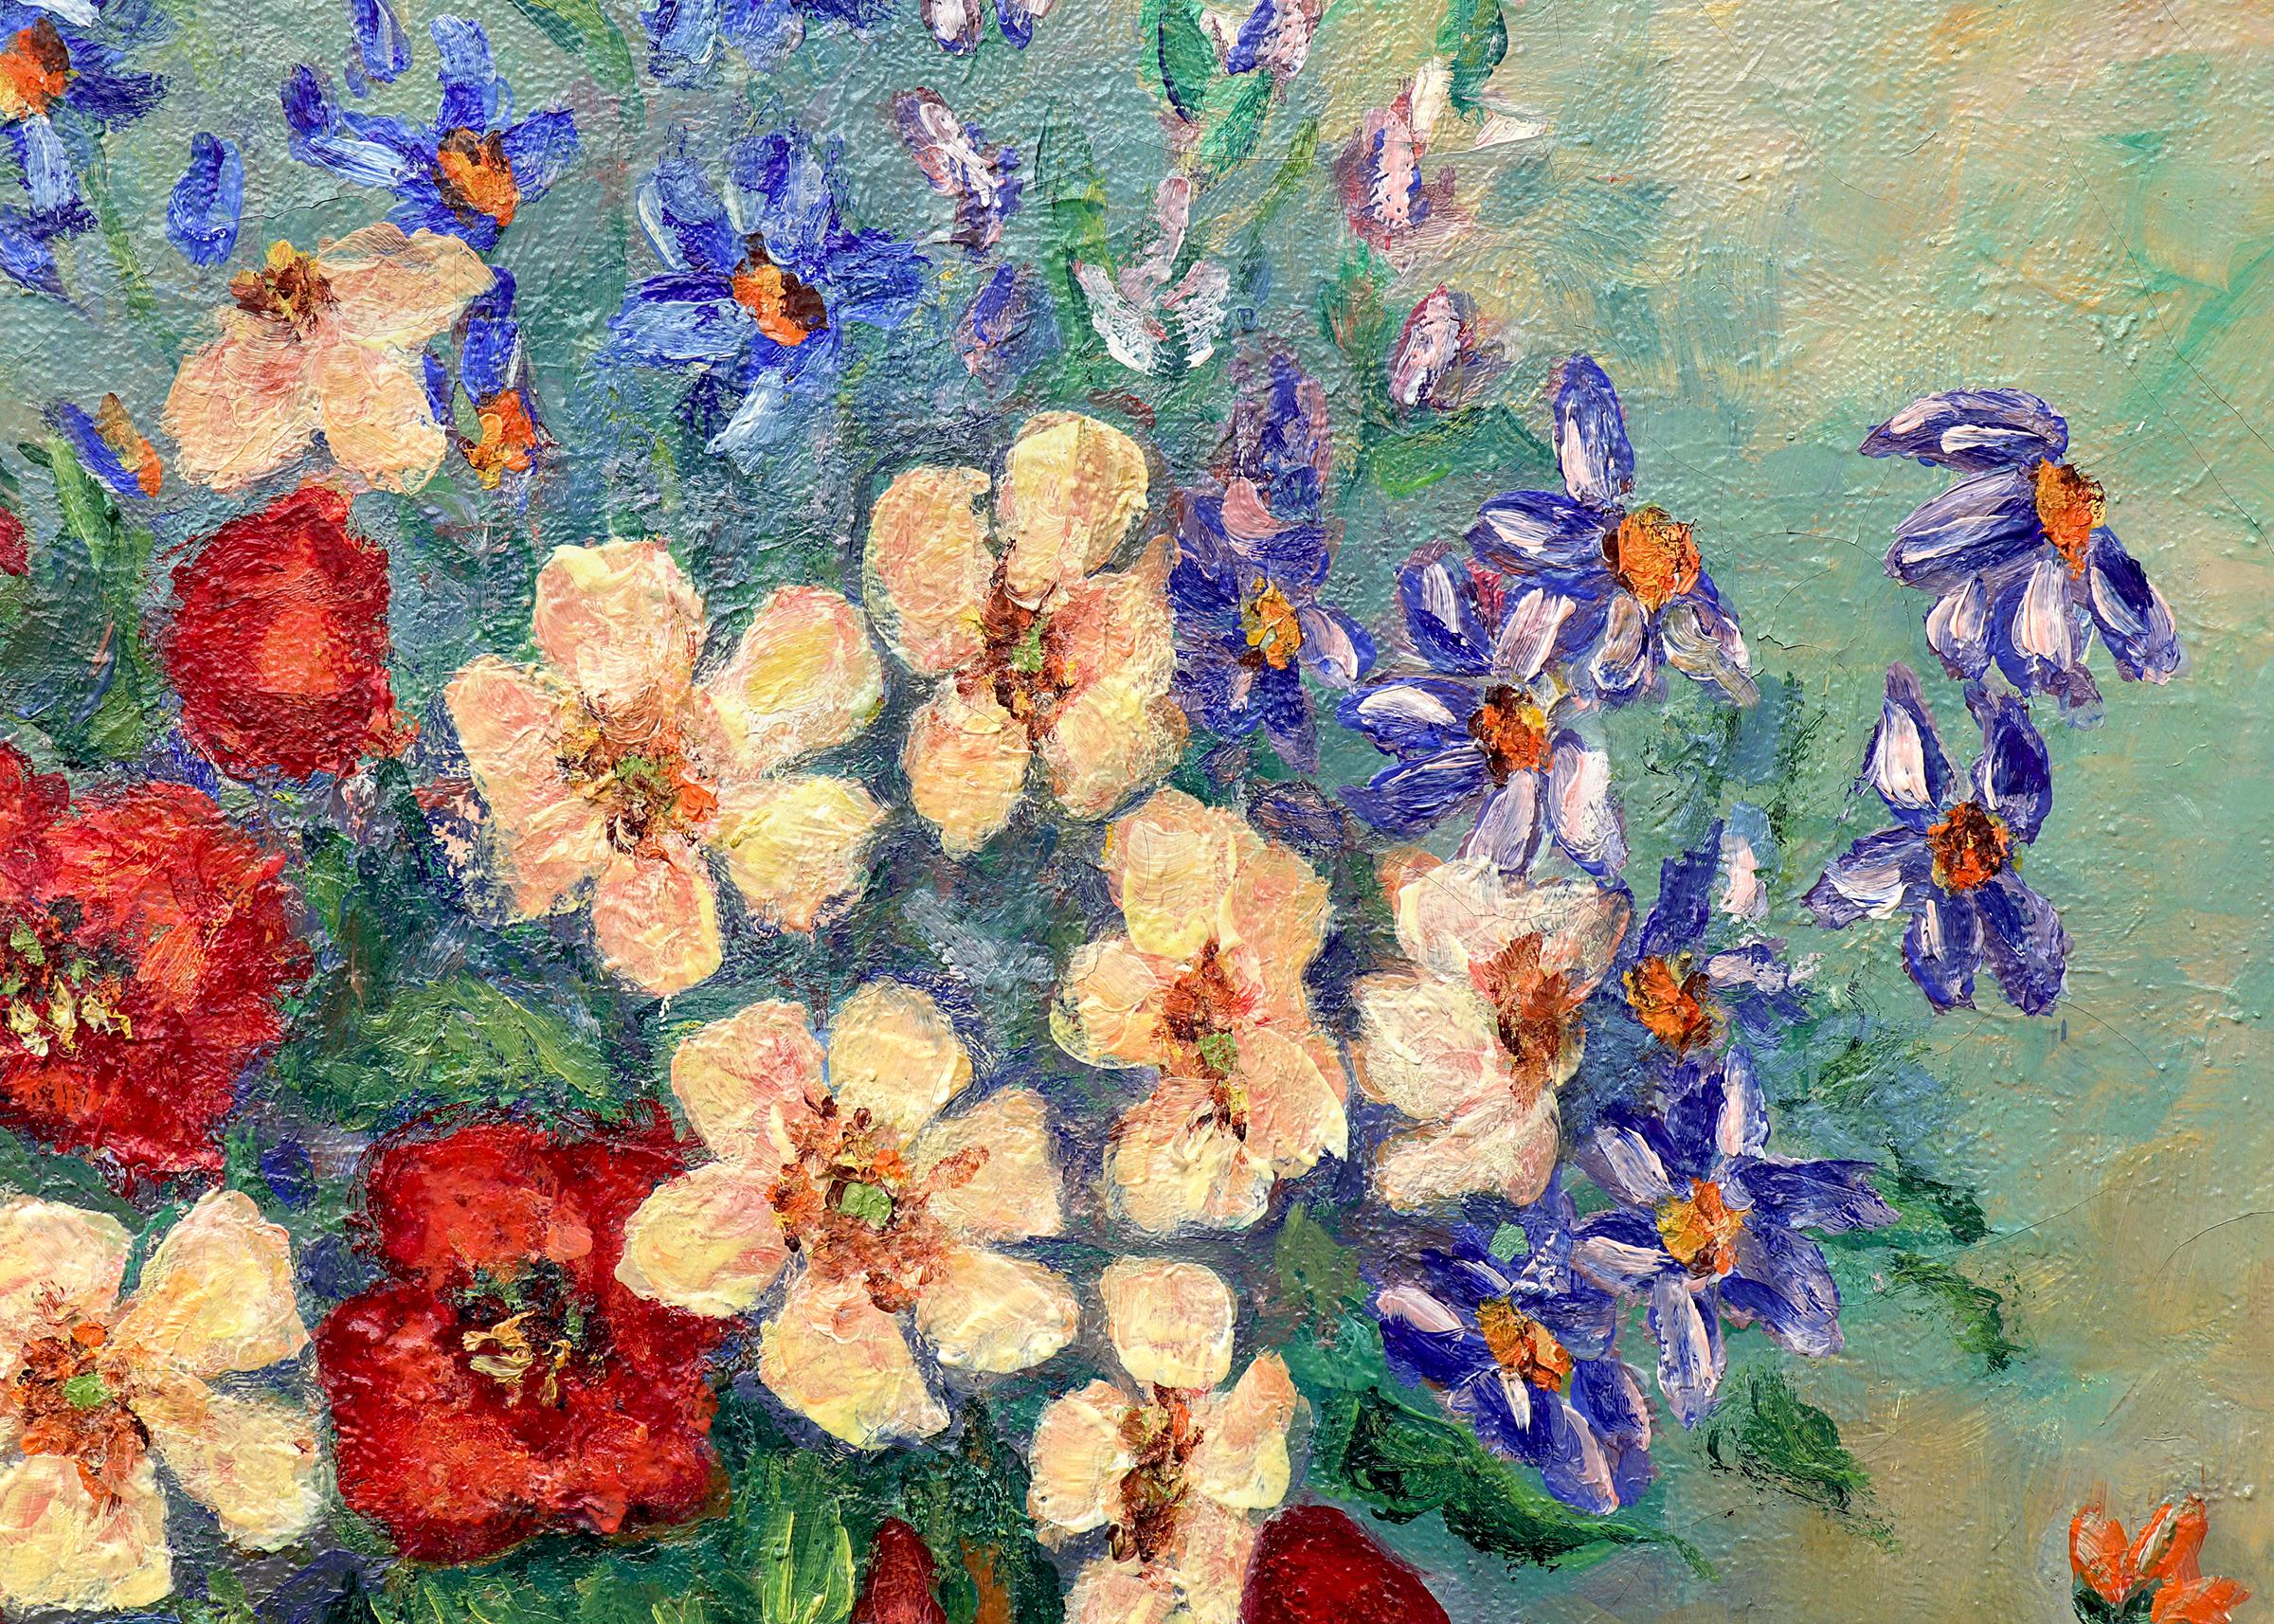 Still Life Painting with Poppies and Wildflowers in Red, White, Blue and Orange 2